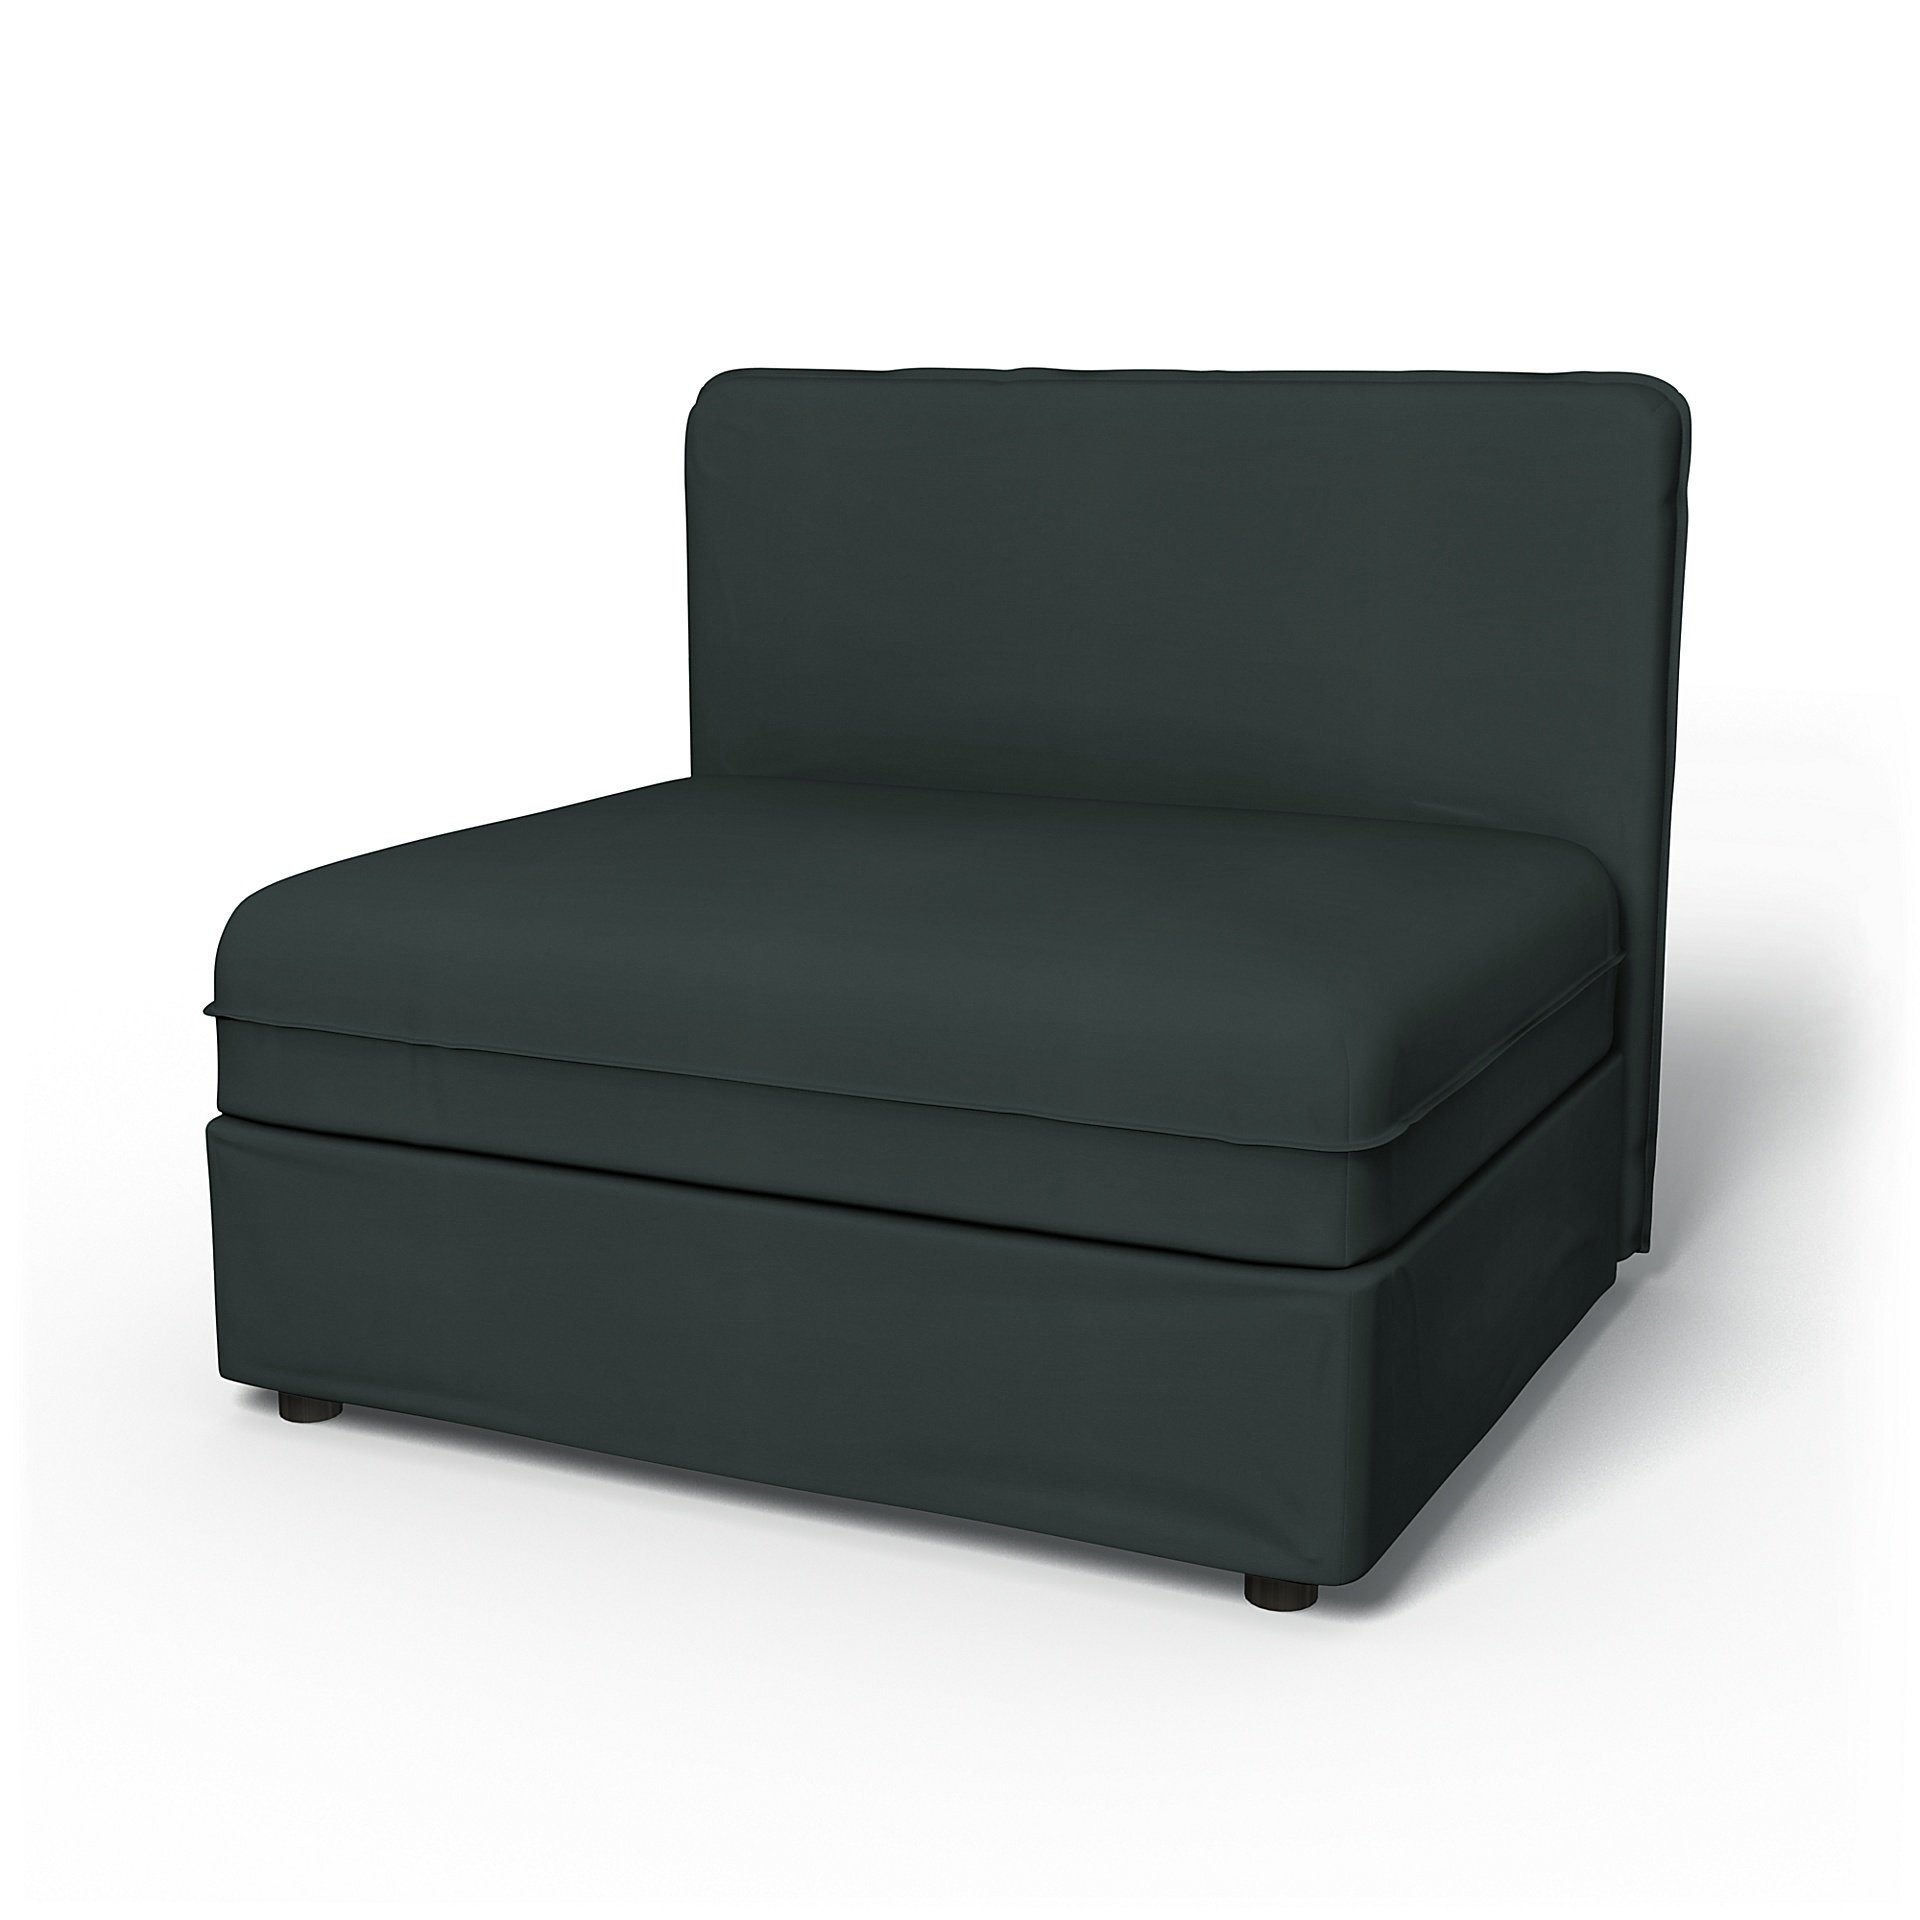 IKEA - Vallentuna Seat Module with Low Back Cover 100x80cm 39x32in, Graphite Grey, Cotton - Bemz